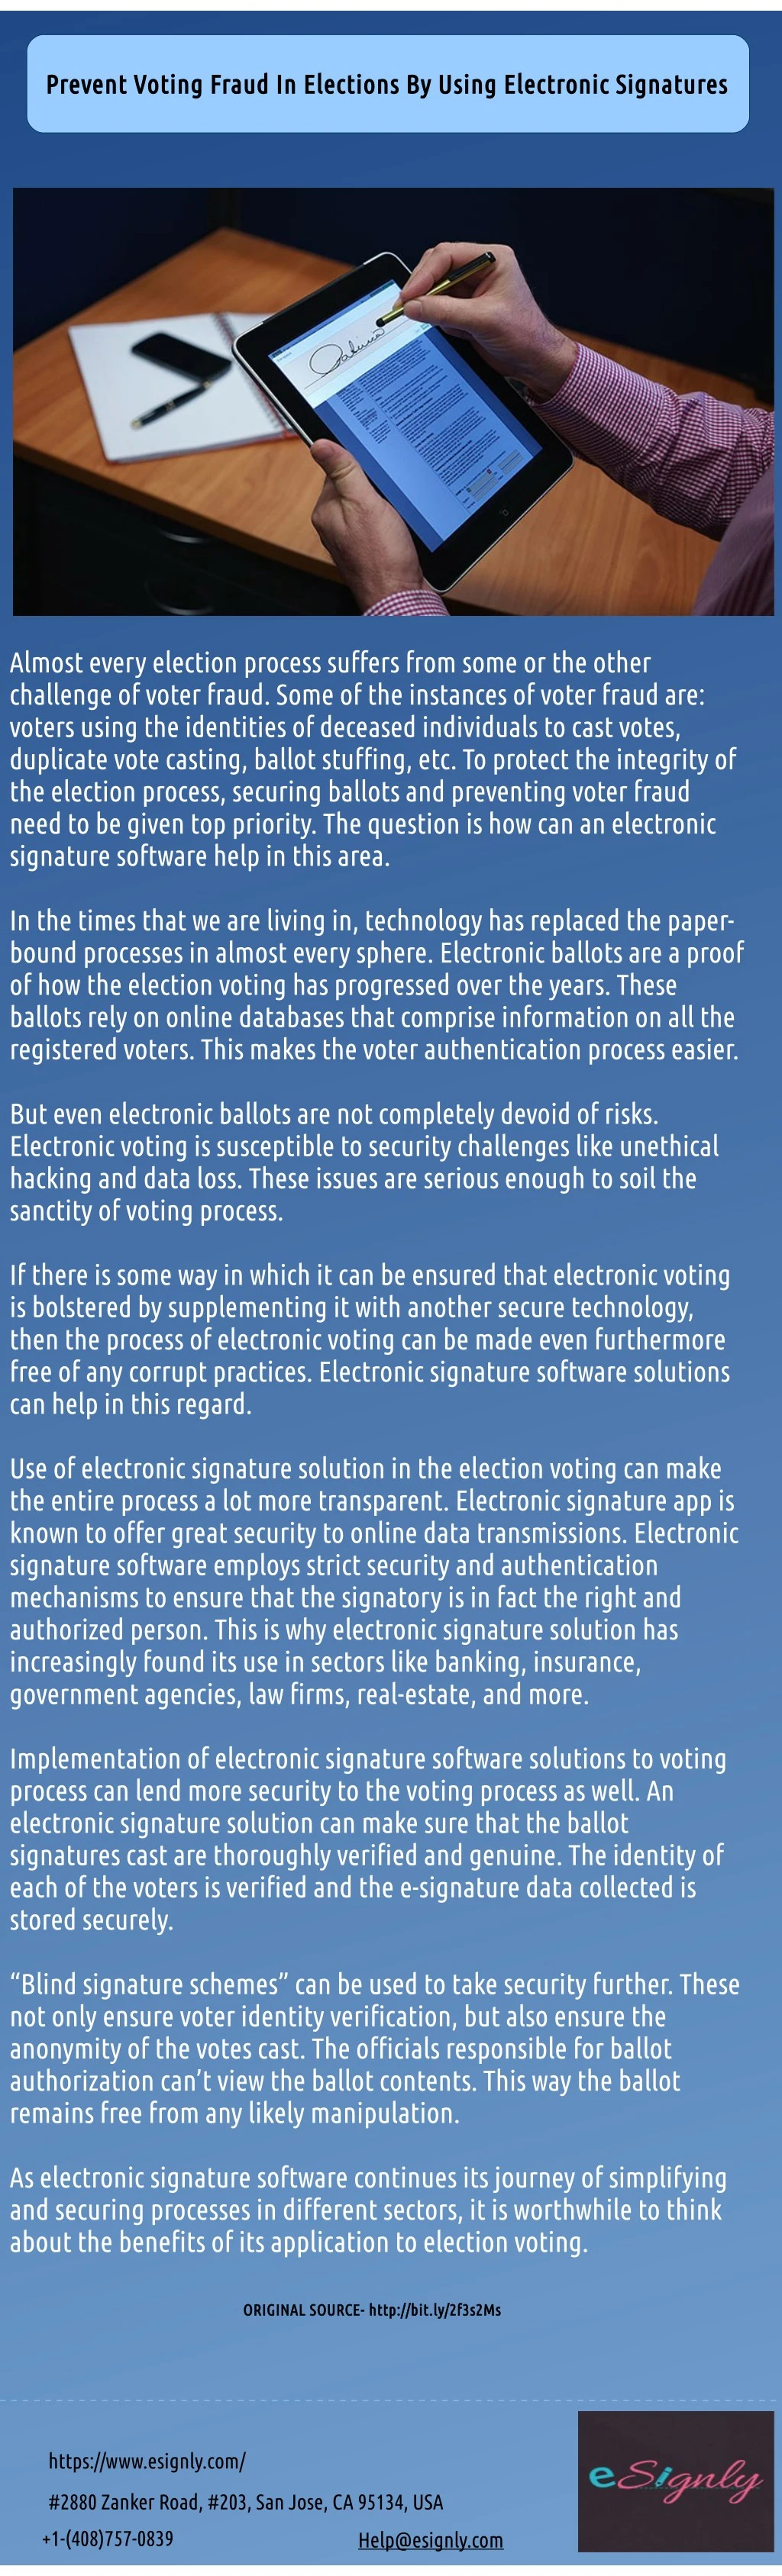 prevent voting fraud in elections by using